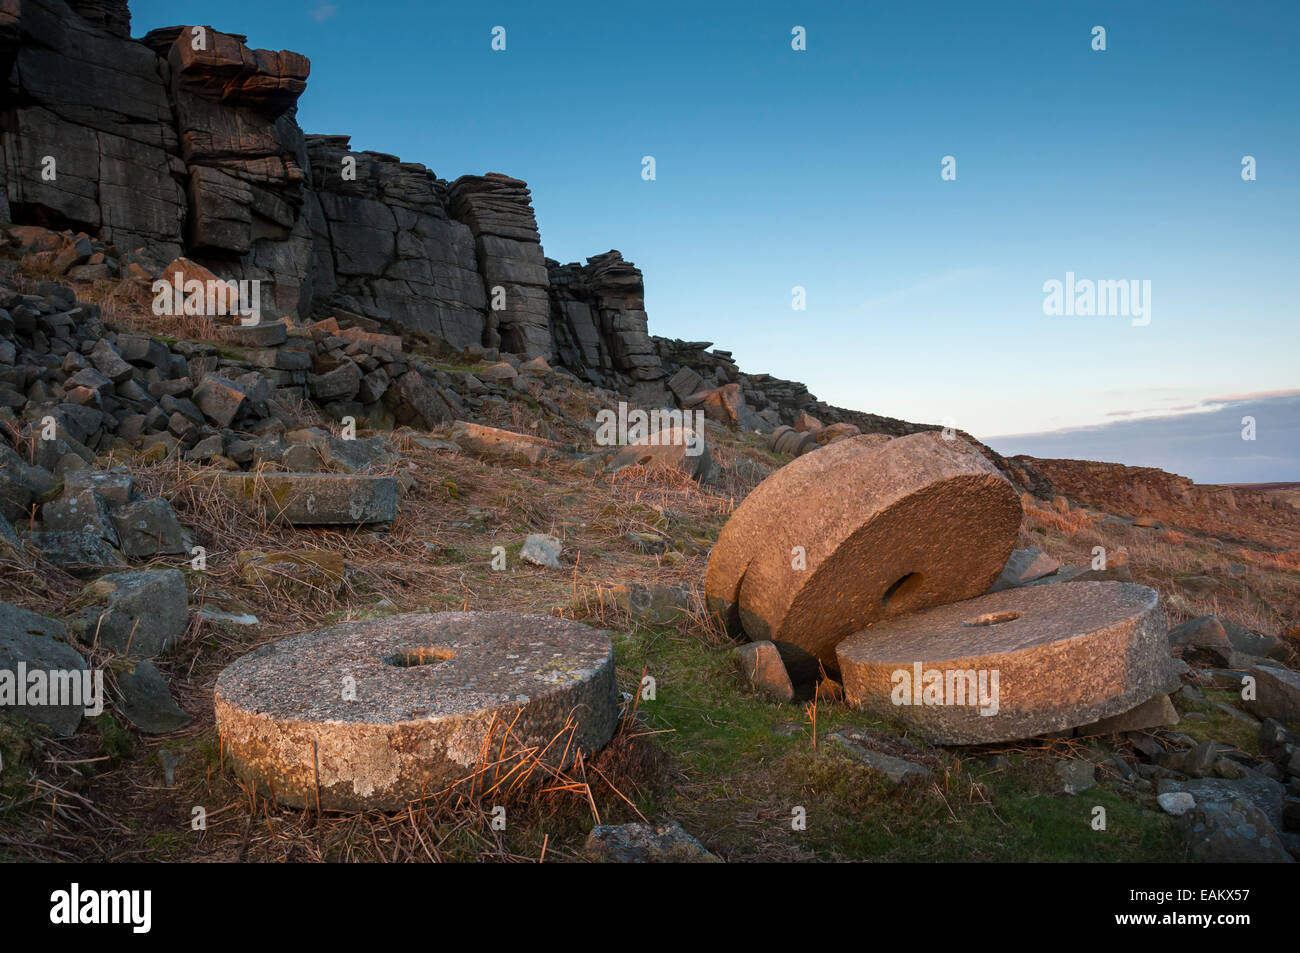 Round millstones below Stanage edge in Derbyshire. Looking up beyond a group of stone to the dramatic gritstone escarpment. Stock Photo